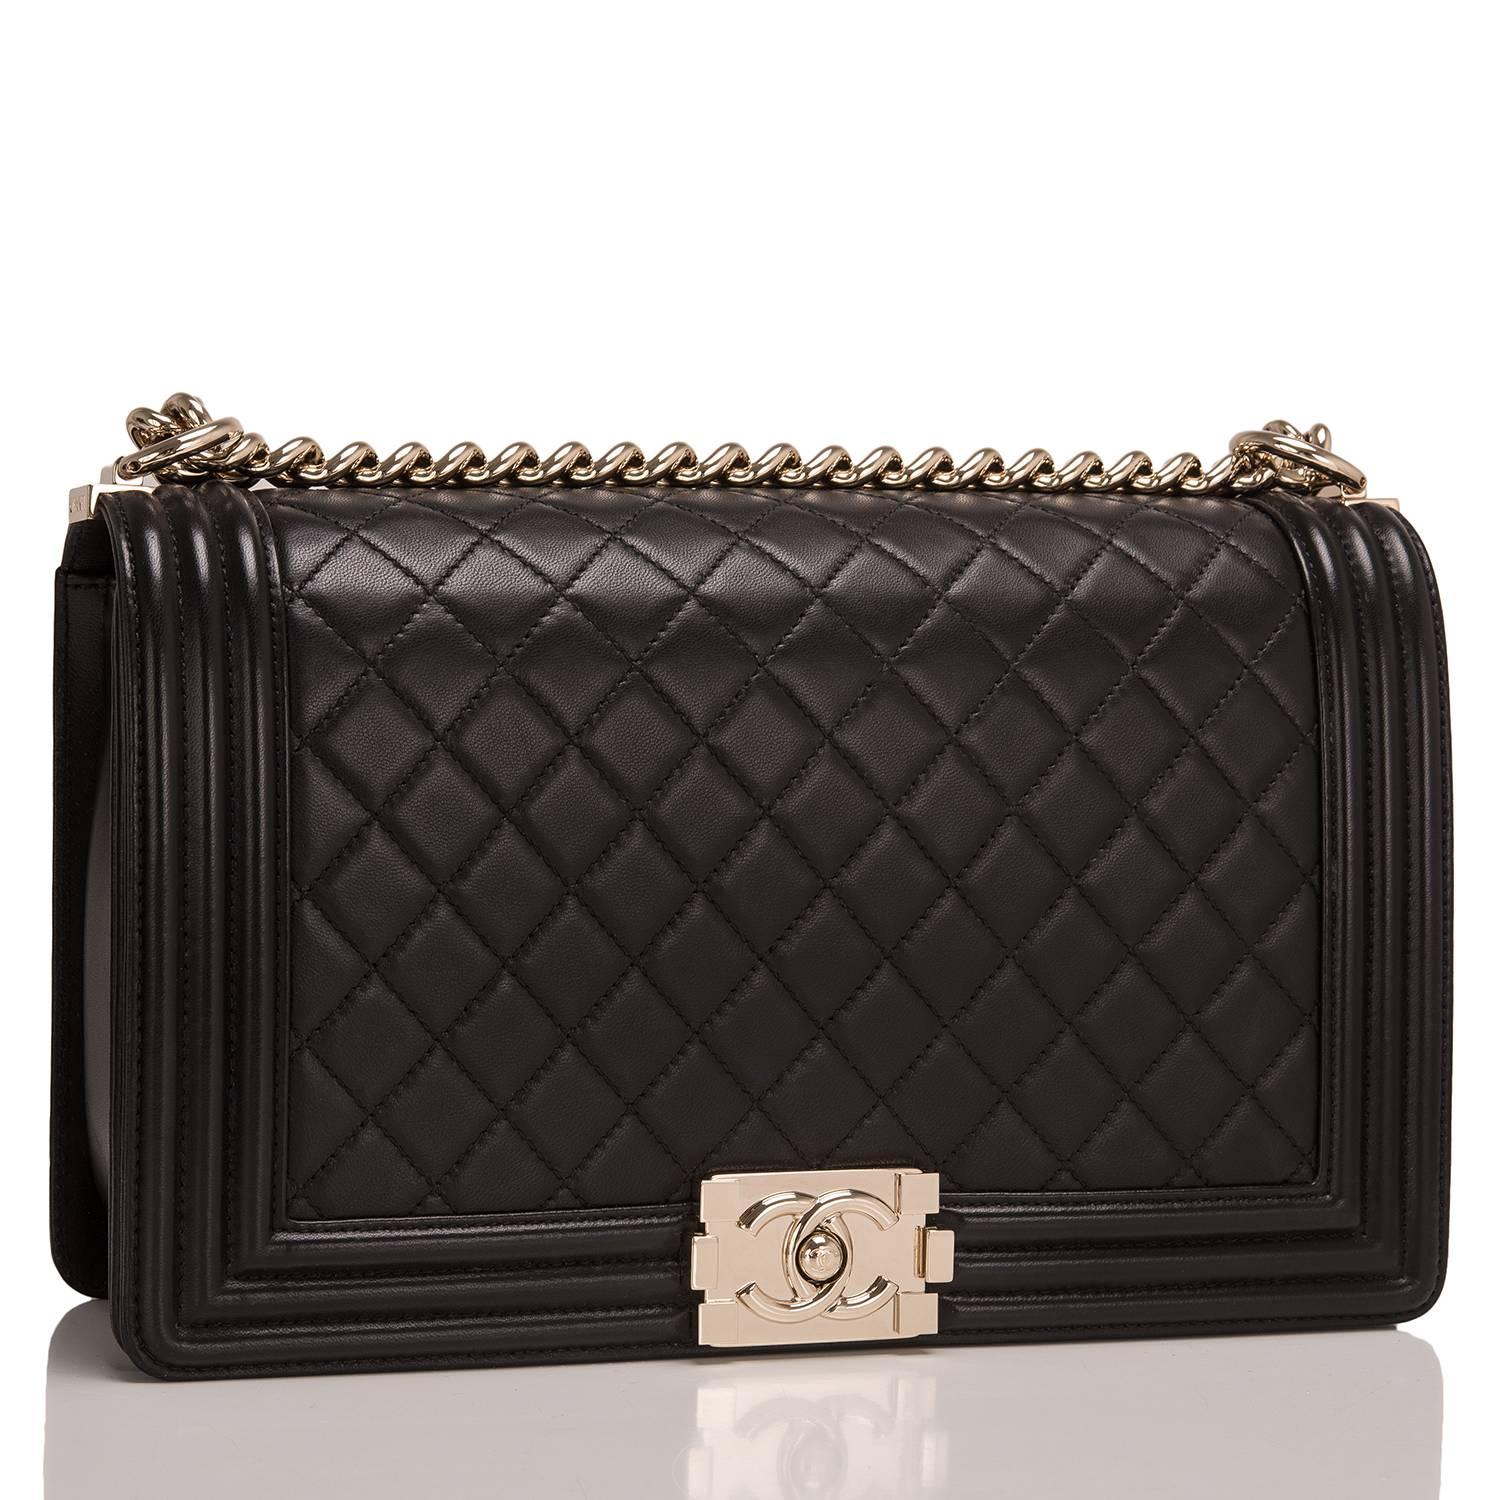 Chanel New Medium Boy bag of black lambskin leather with light gold tone hardware.

This bag features a full front flap with the Le Boy CC push lock closure and a light gold tone chain link and black leather padded shoulder/crossbody strap.

The